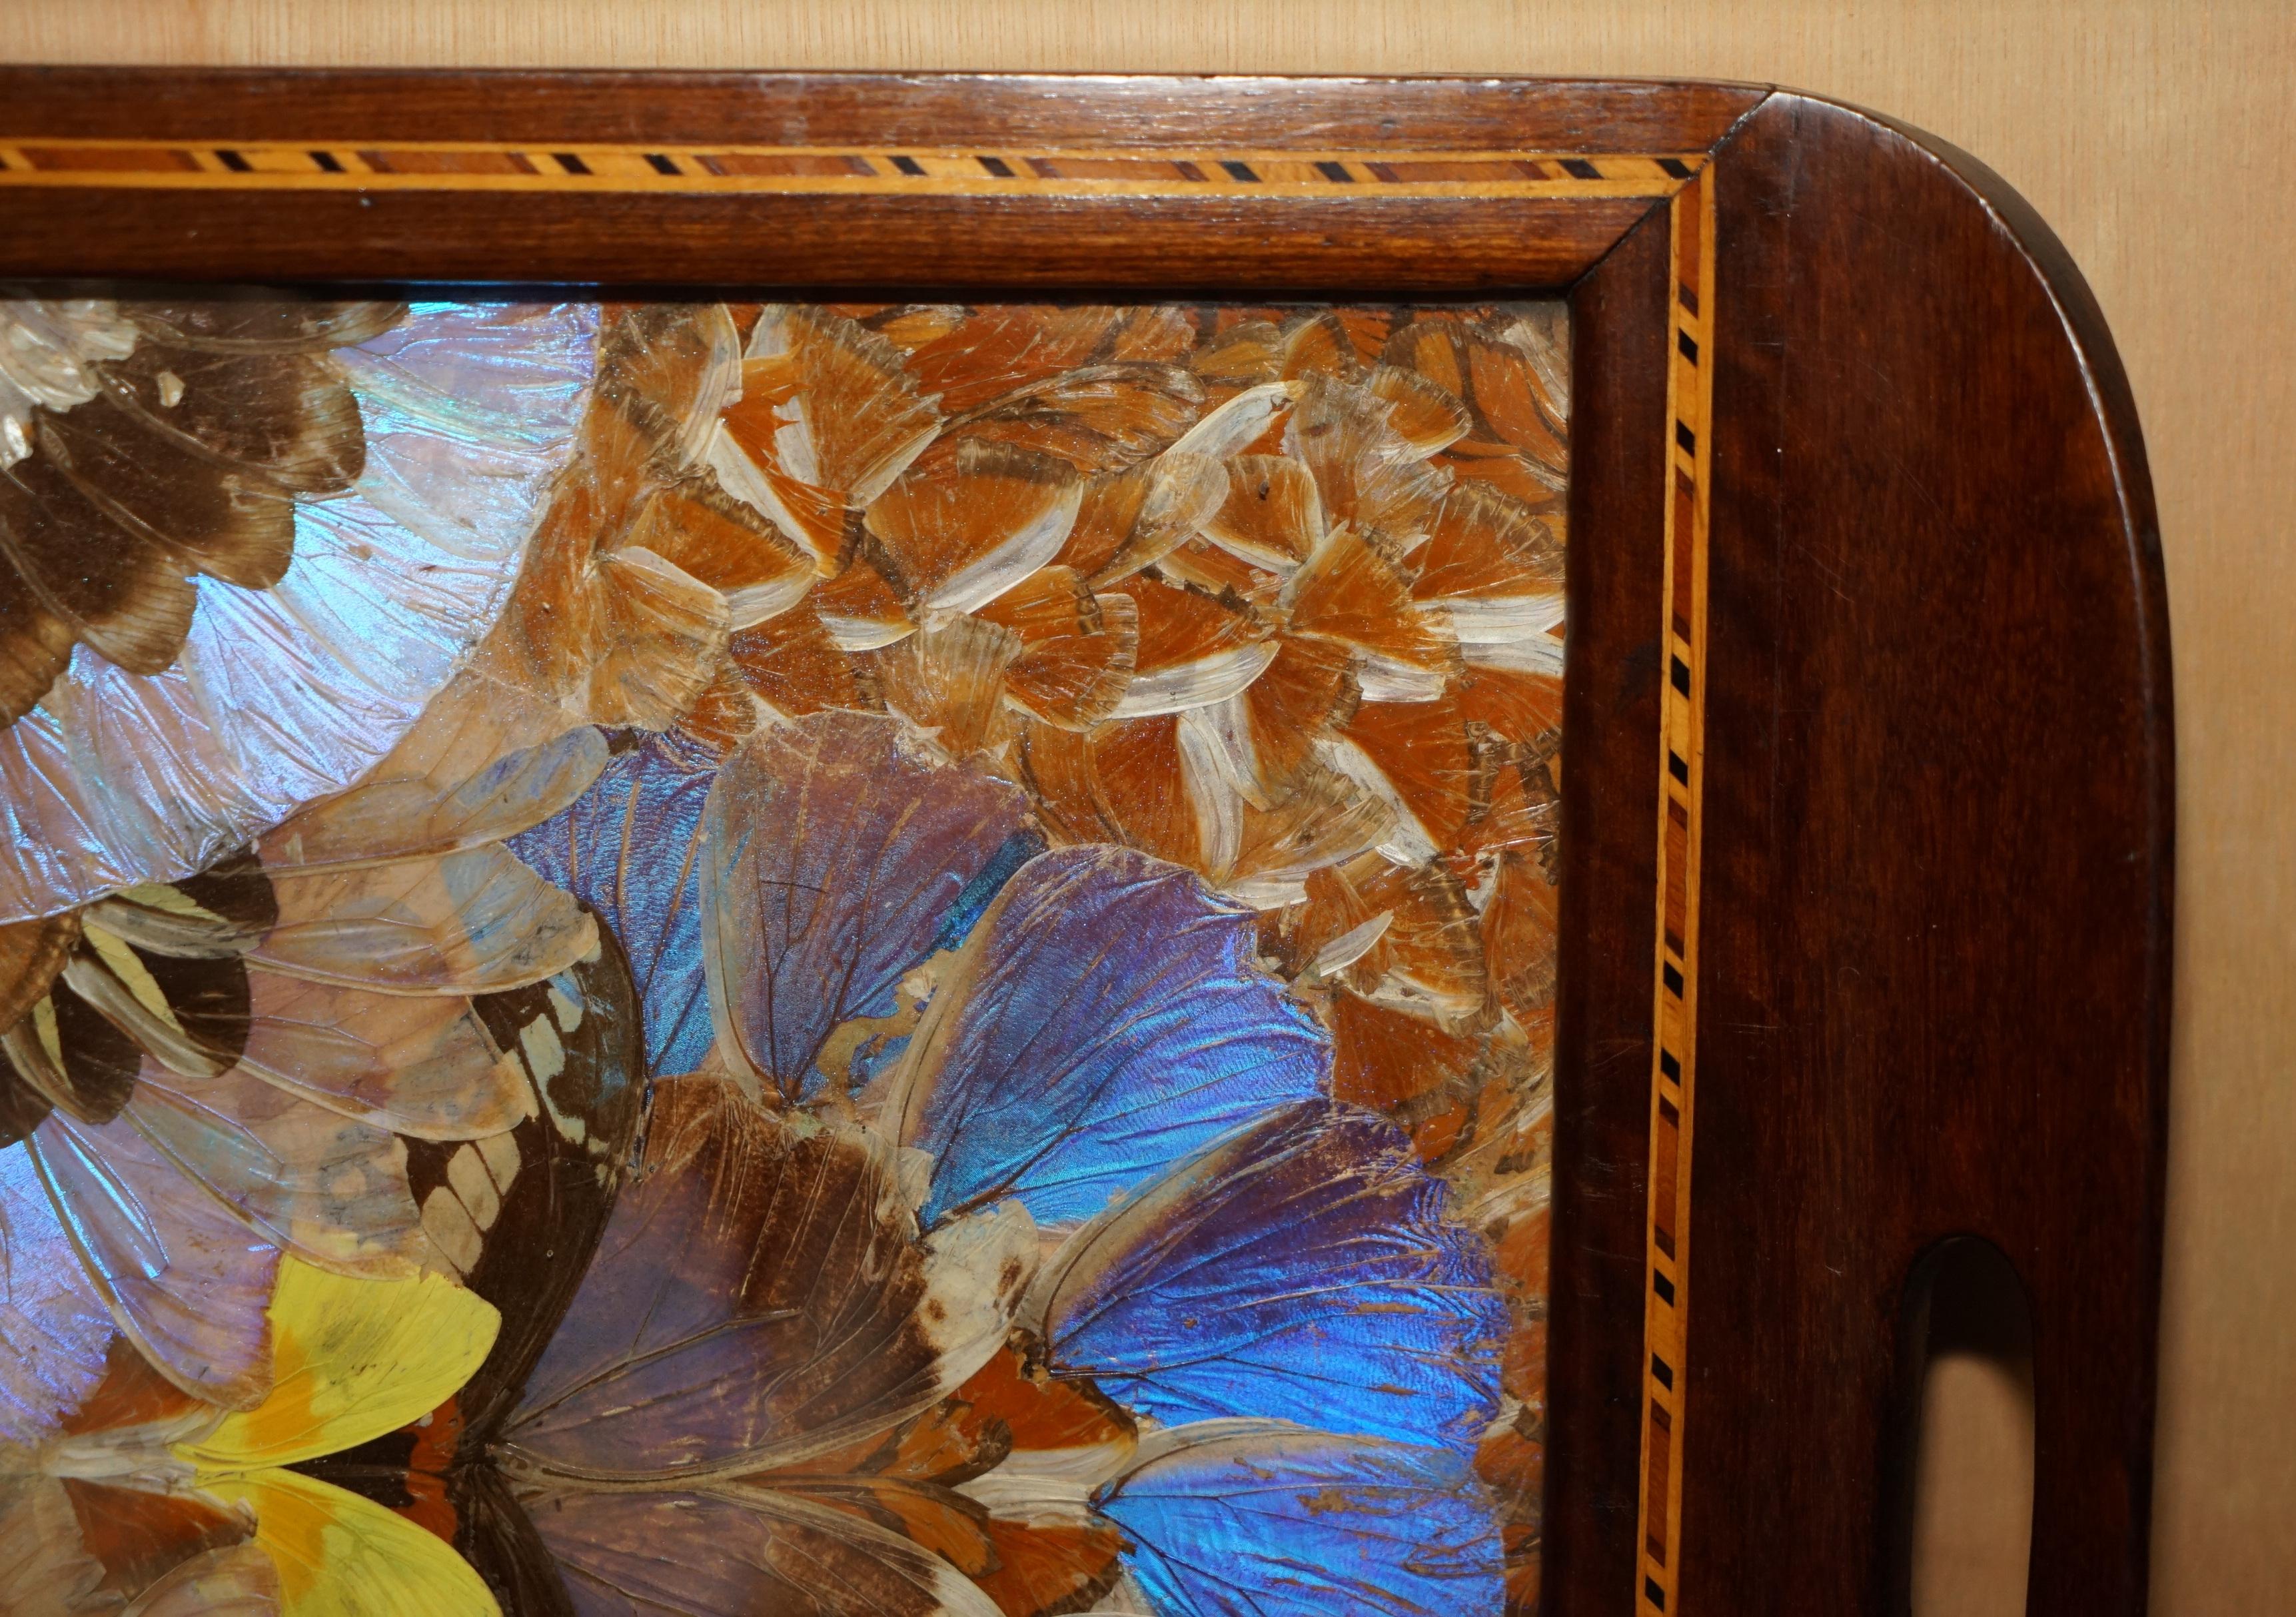 EXQUiSITE RIO DE JANEIRO BRAZILIAN HARDWOOD BUTTERFLY WING BUTLERS SERVING TRAY For Sale 4